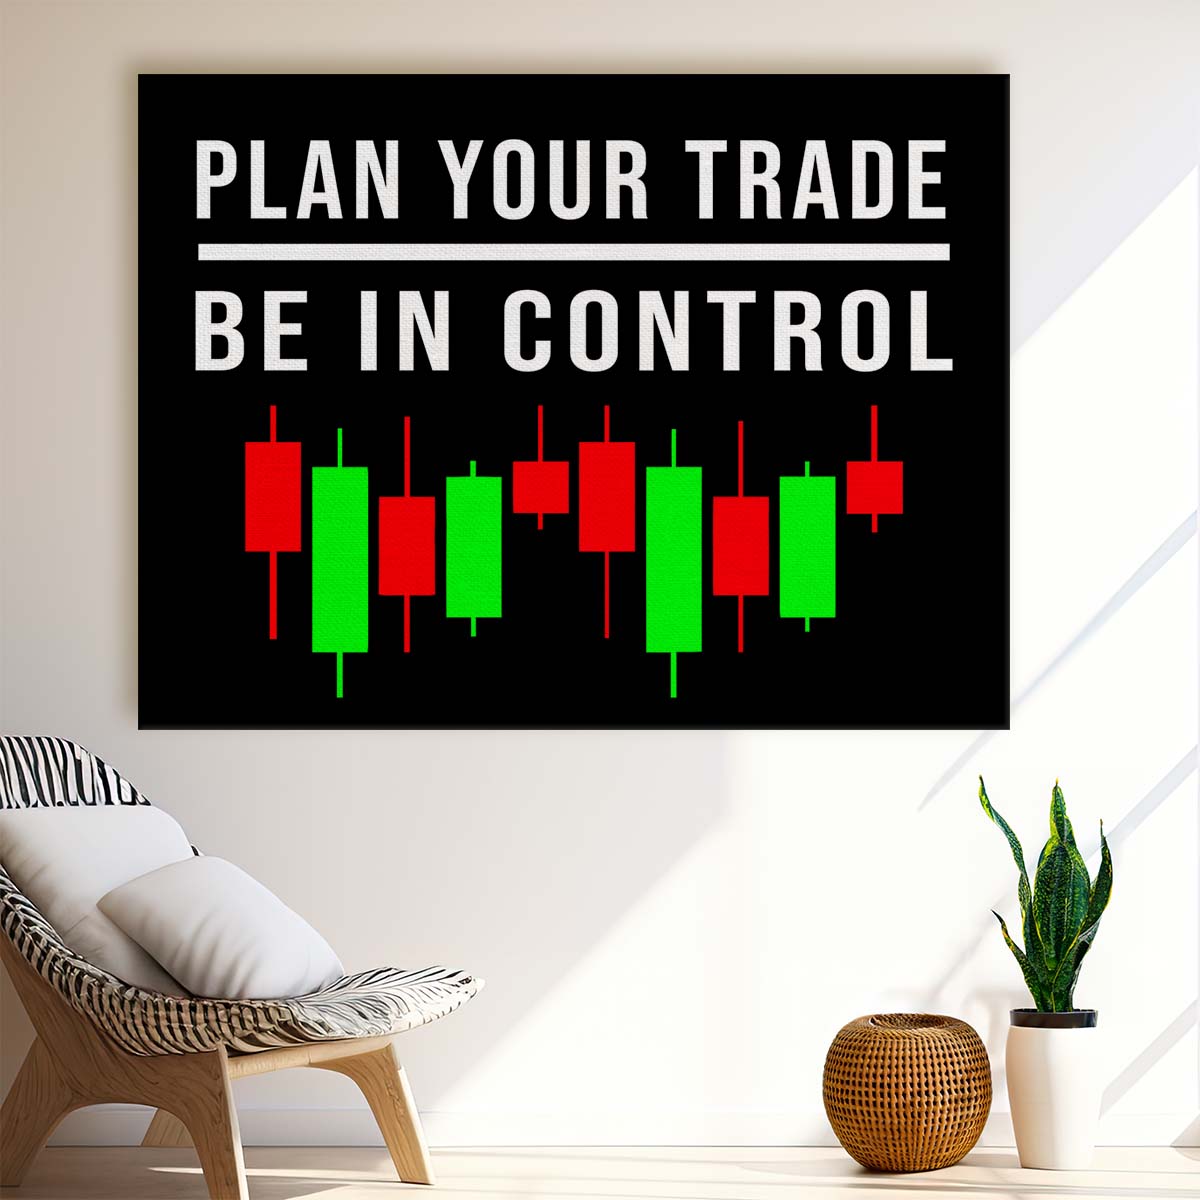 Plan Your Trade Wall Art by Luxuriance Designs. Made in USA.